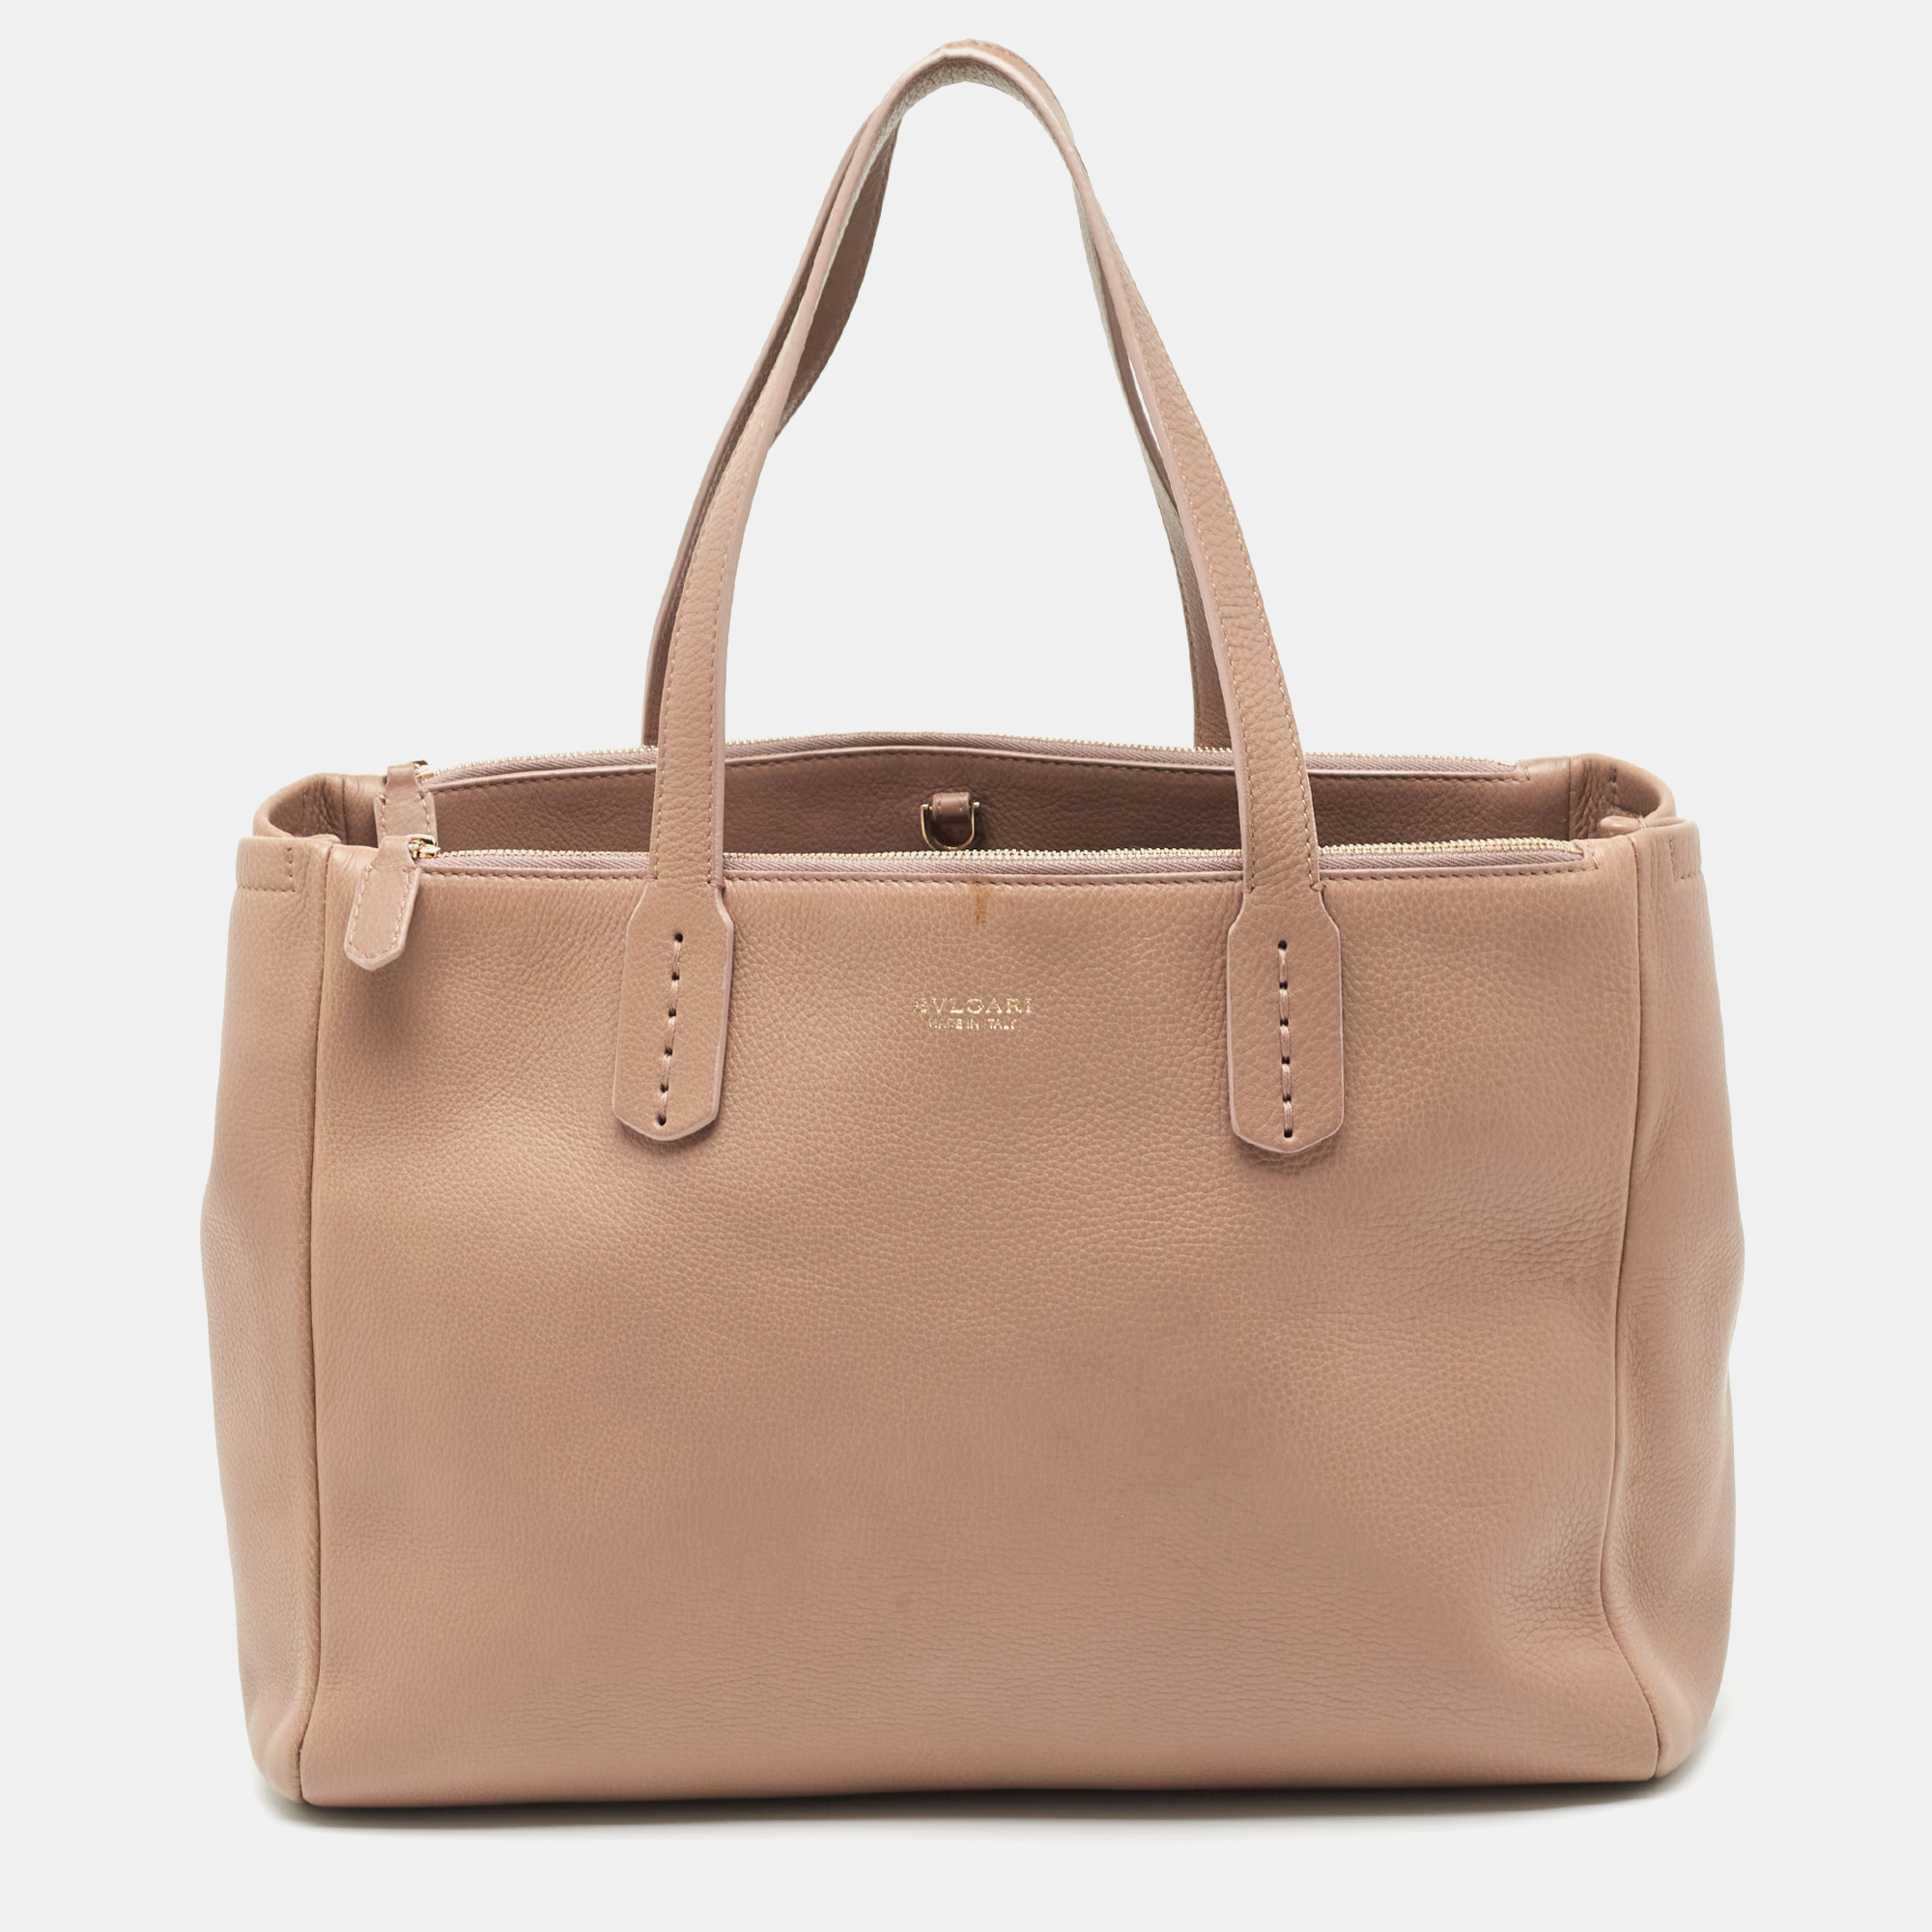 Bvlgari Light Brown Leather Double Zip Tote